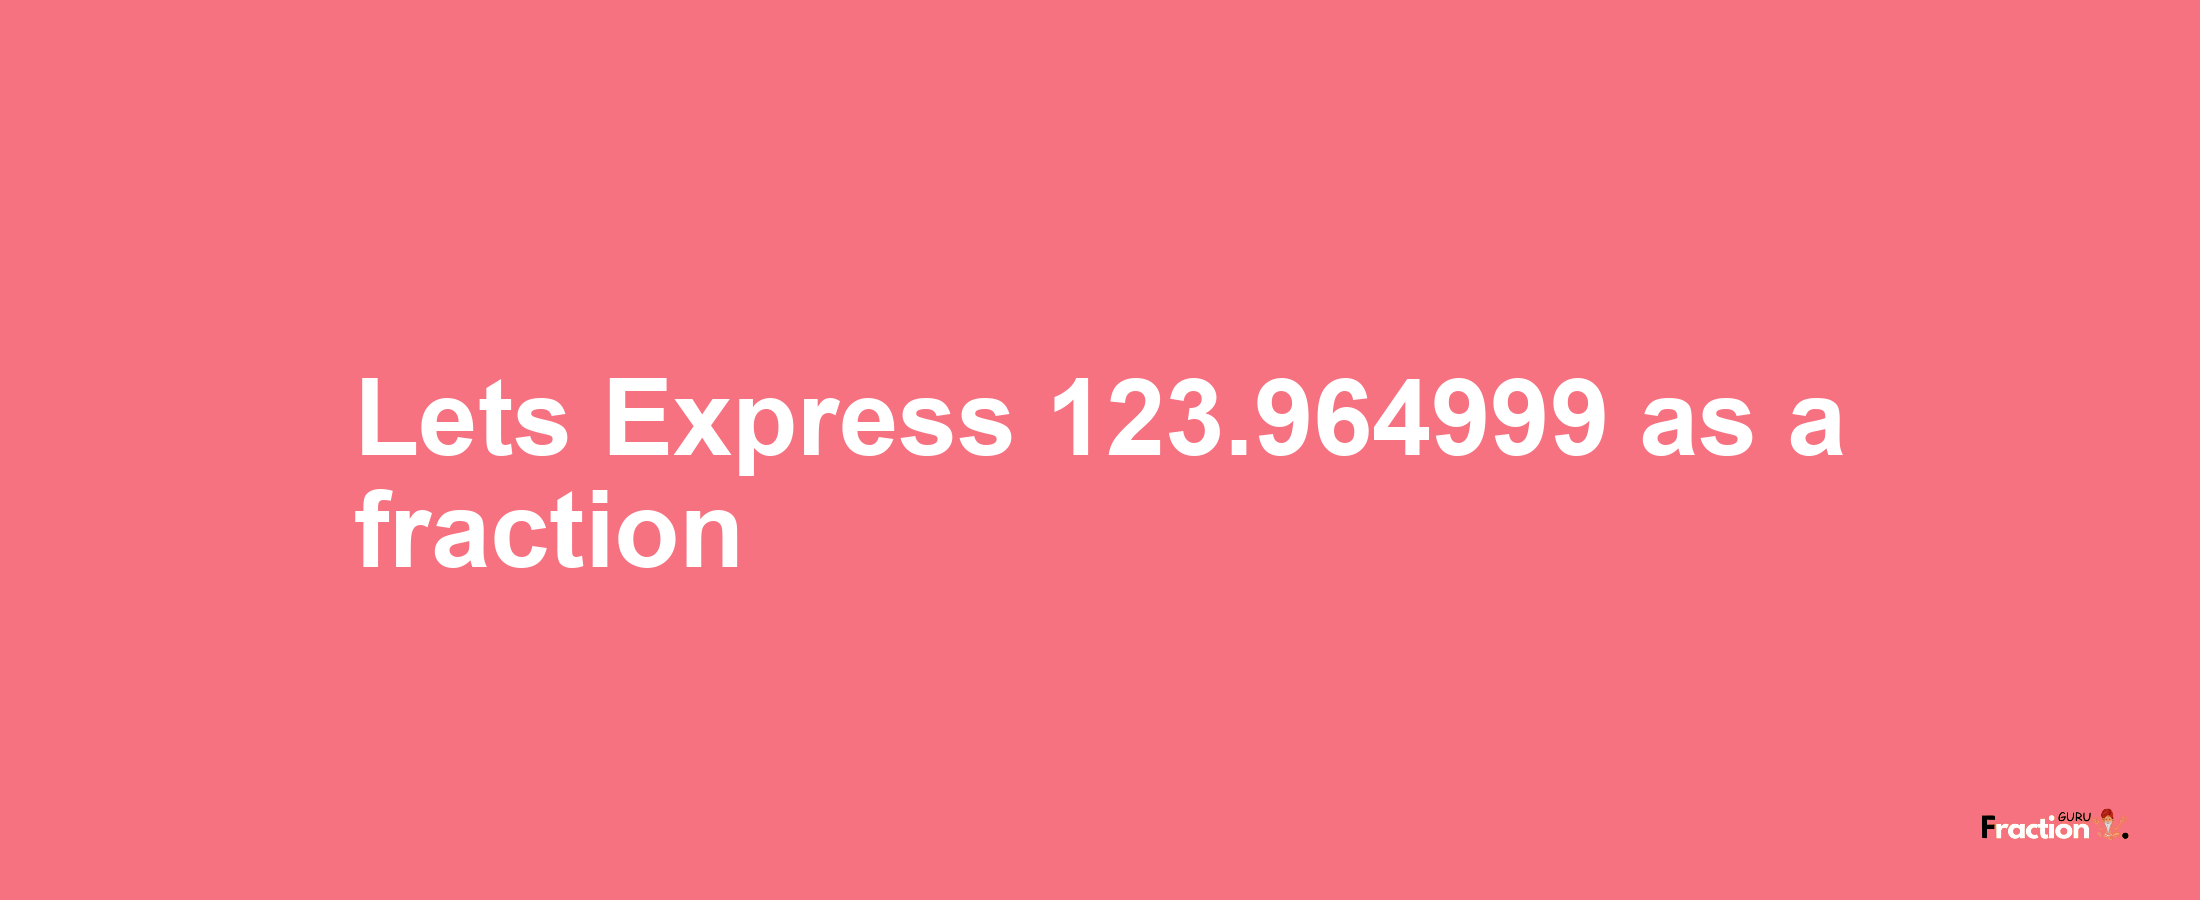 Lets Express 123.964999 as afraction